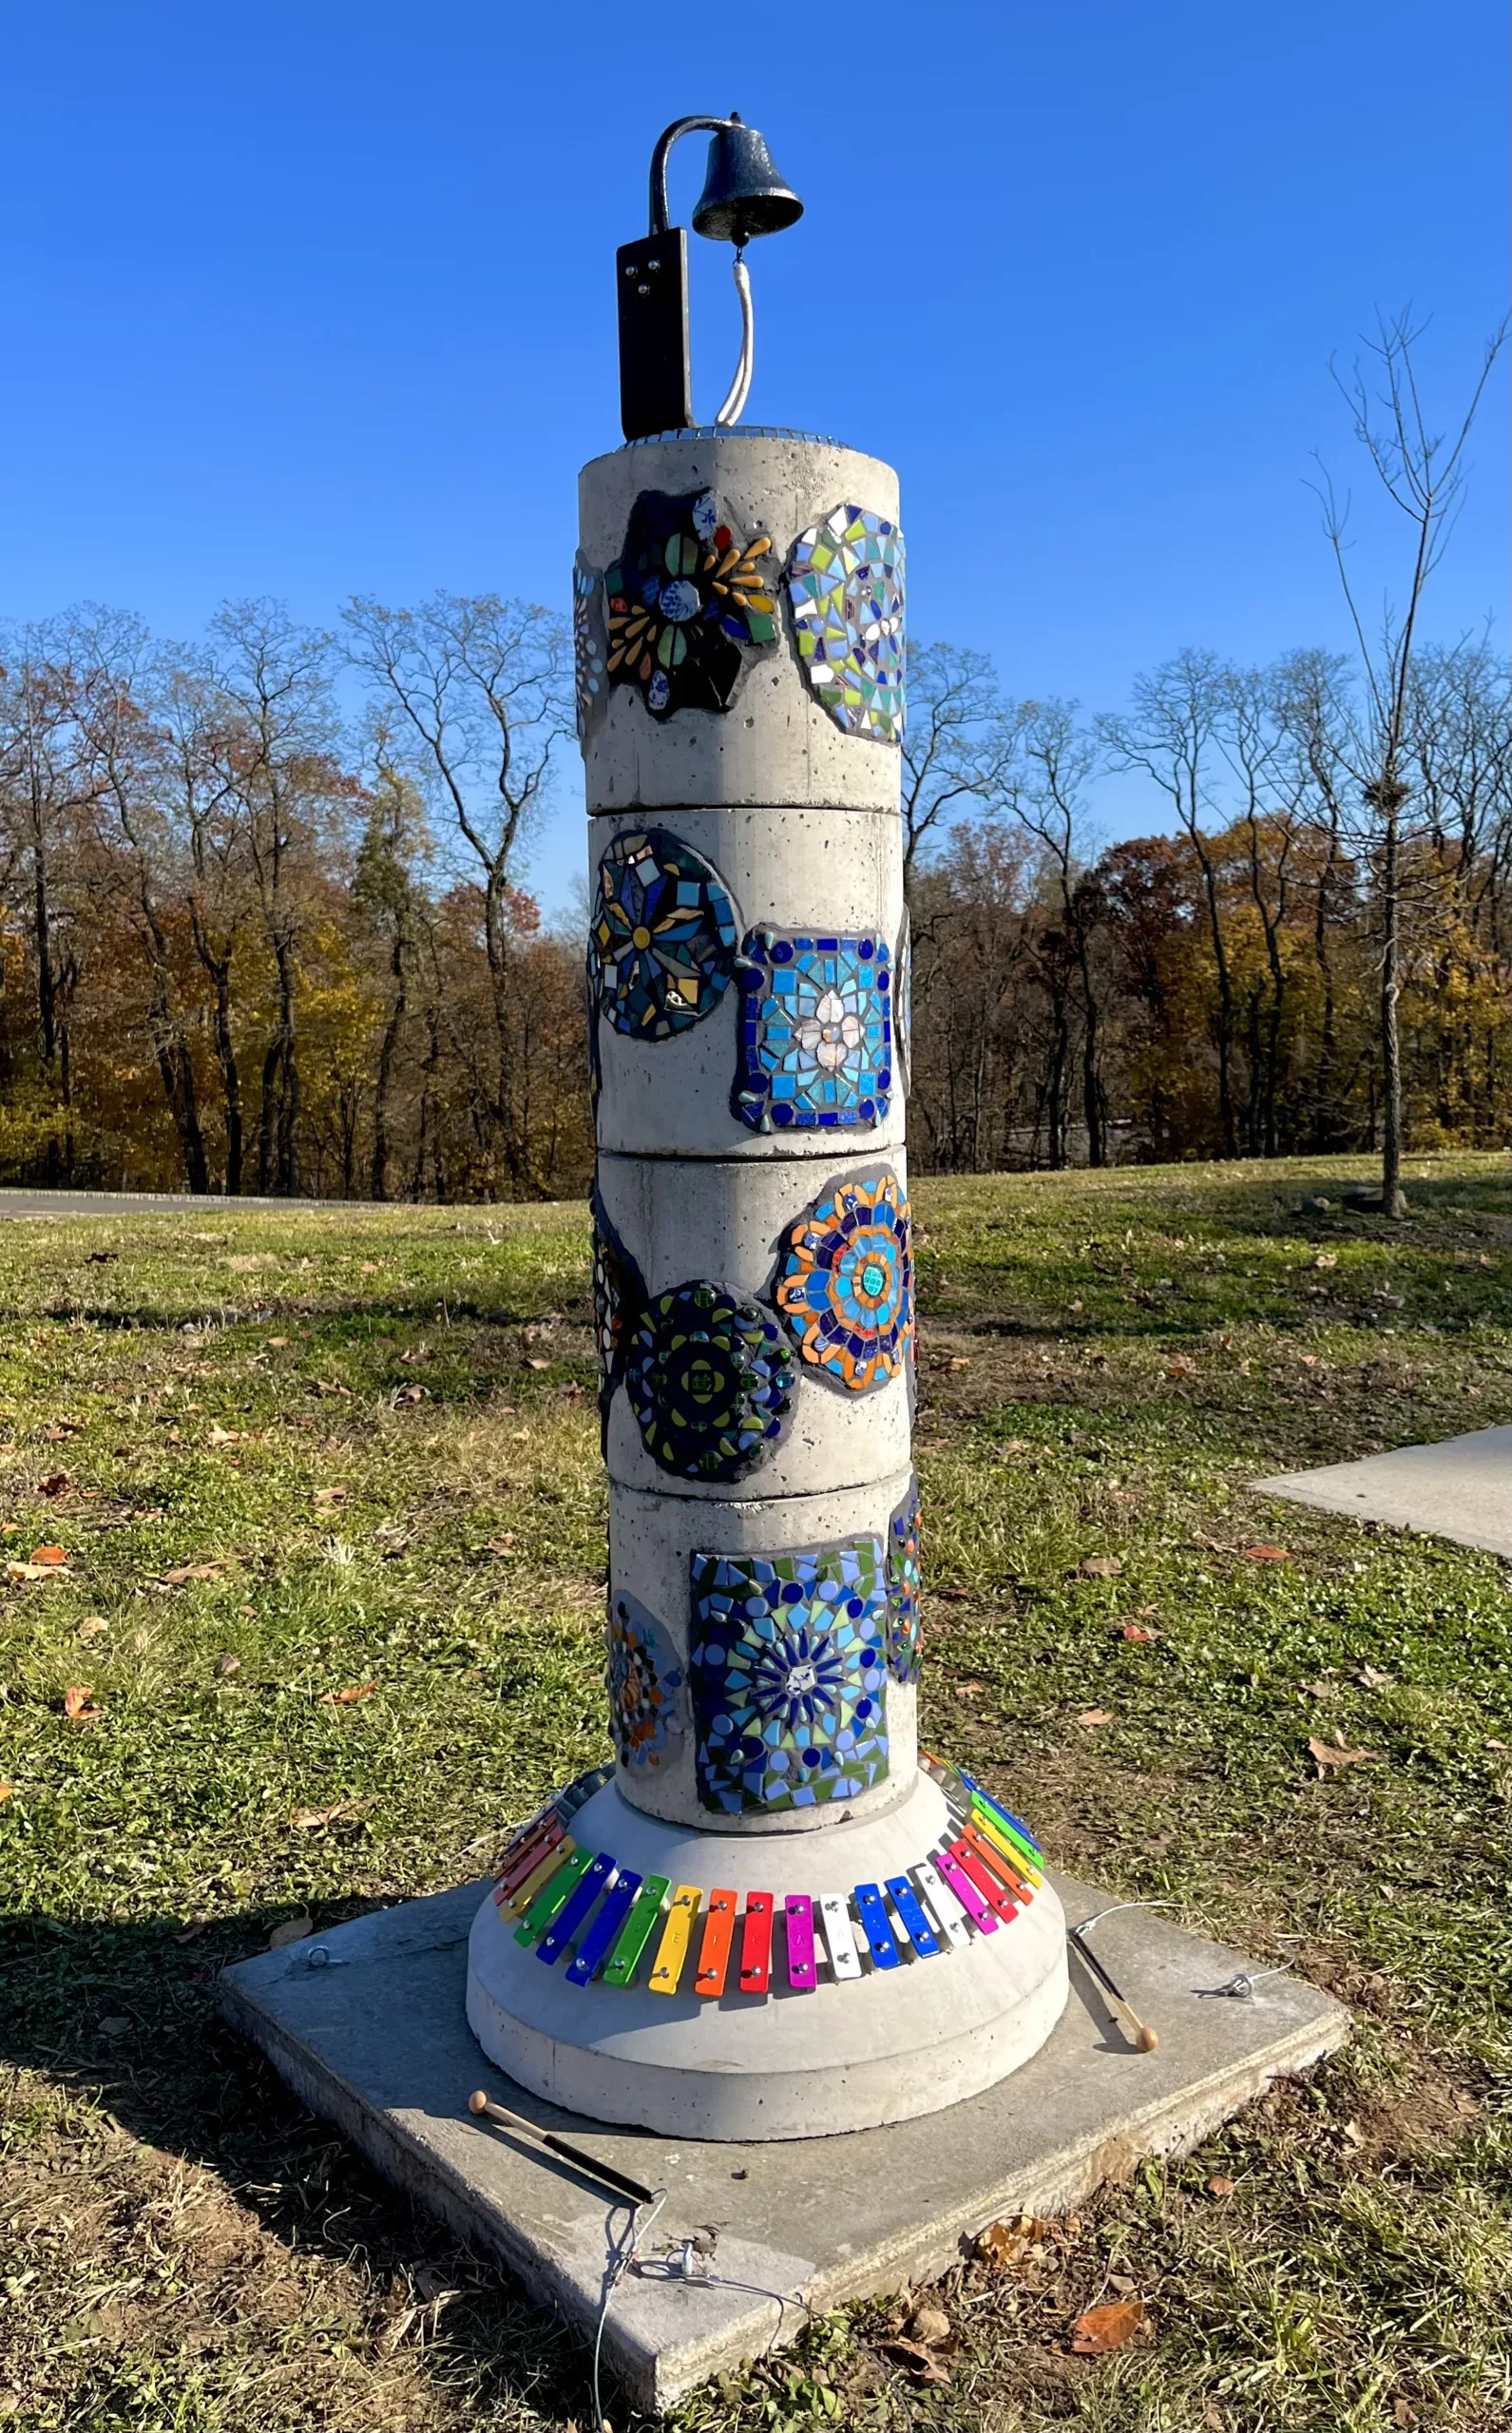 "Sound Column" art is a sculpture w/ mosaics, a bell on top, and xylophone on bottom.